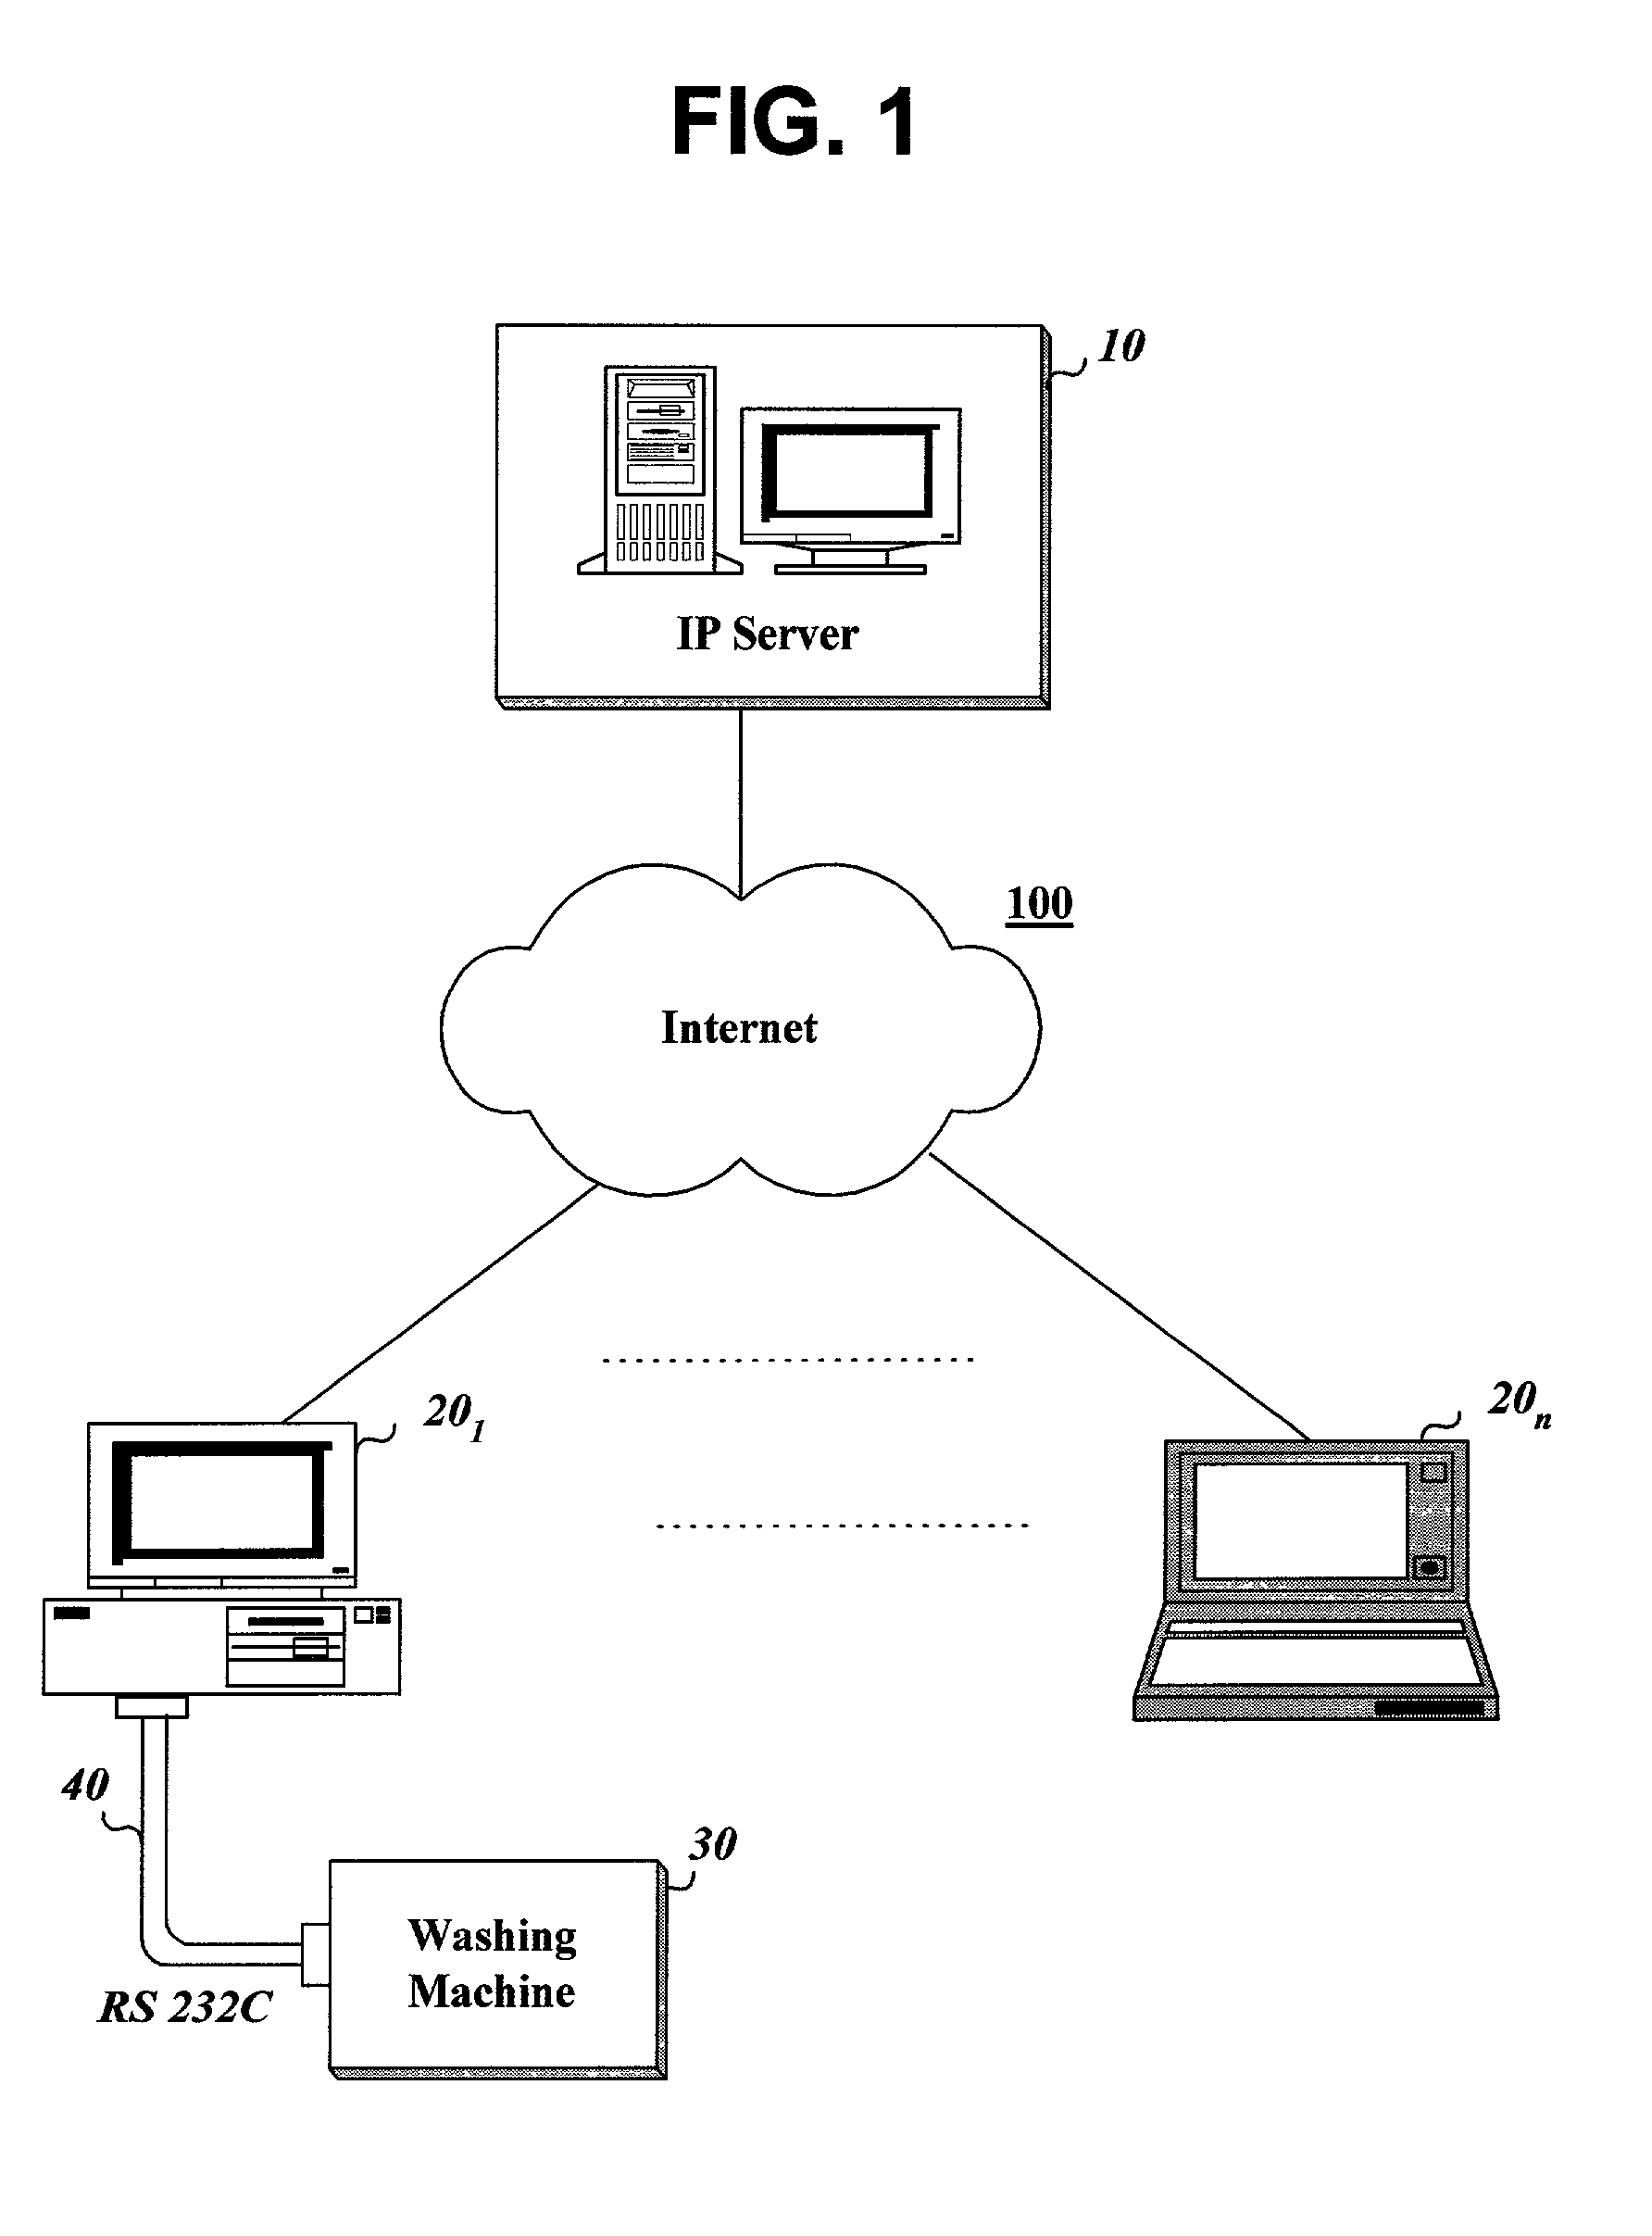 Method of providing washing course programs and self diagnosis service of an automatic washer from a remote server